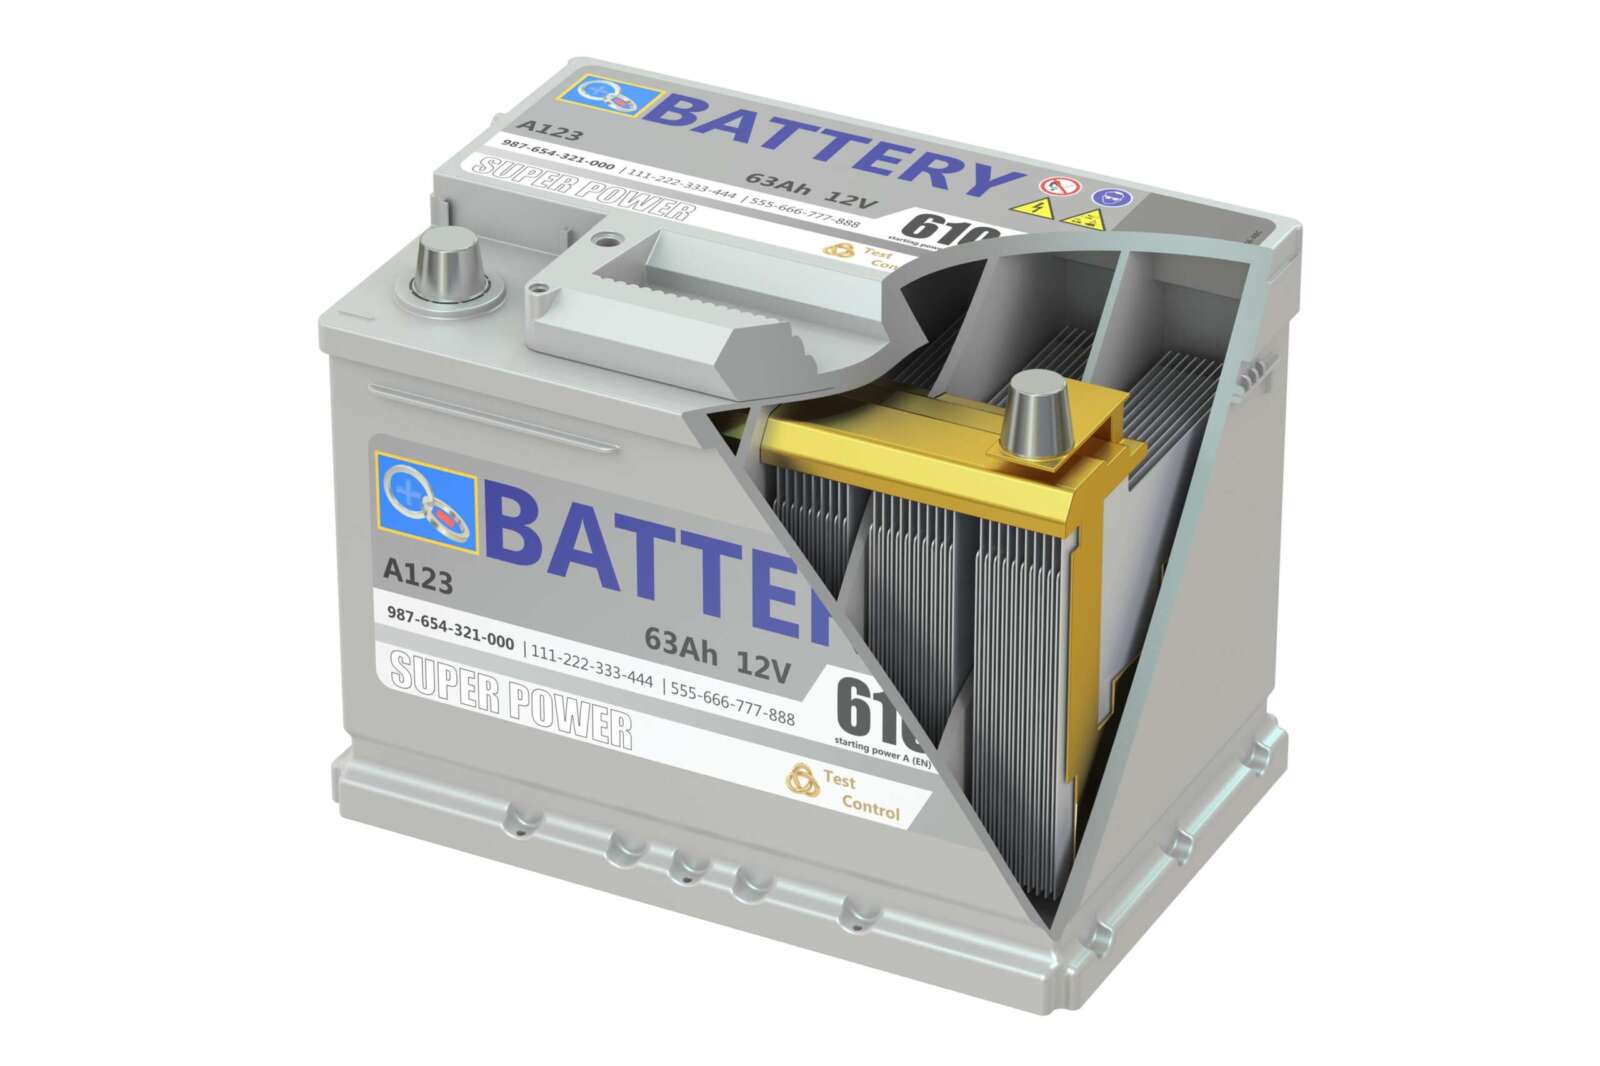 6 Best Group 51 Battery You Can Buy in 2021